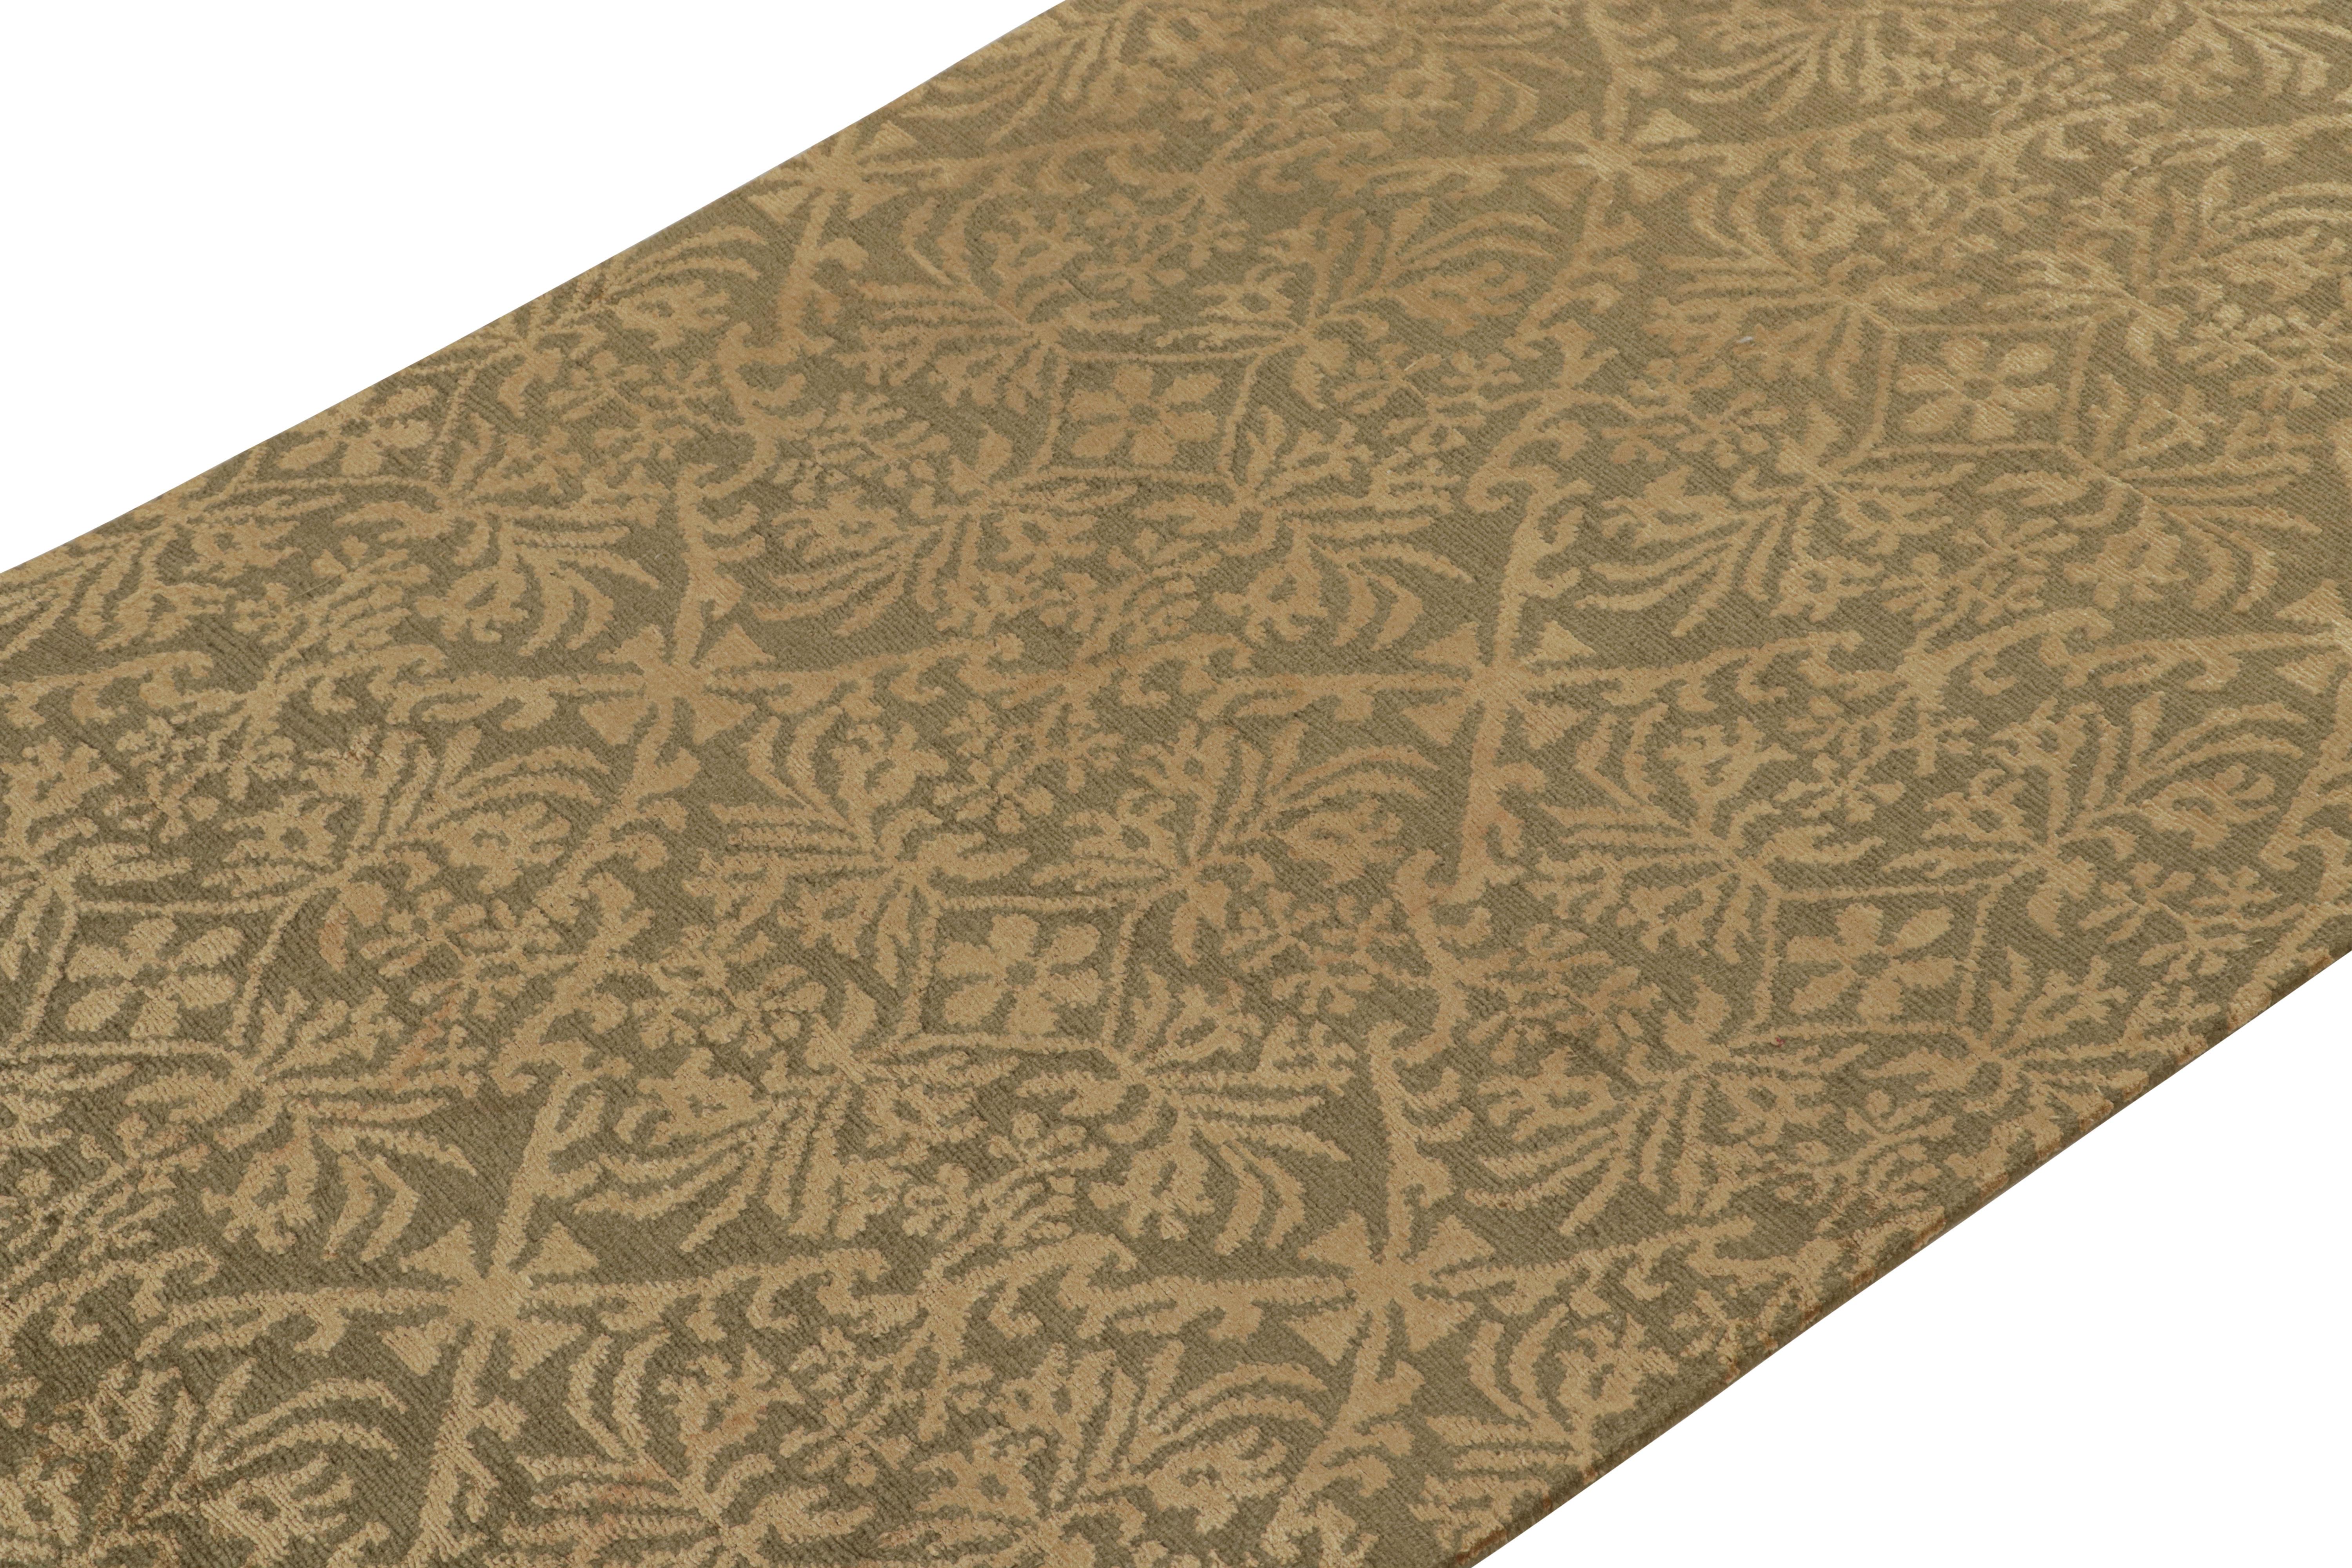 Nepalese Rug & Kilim’s European Style Runner Rug in Green and Gold Florals “Cordoba” For Sale